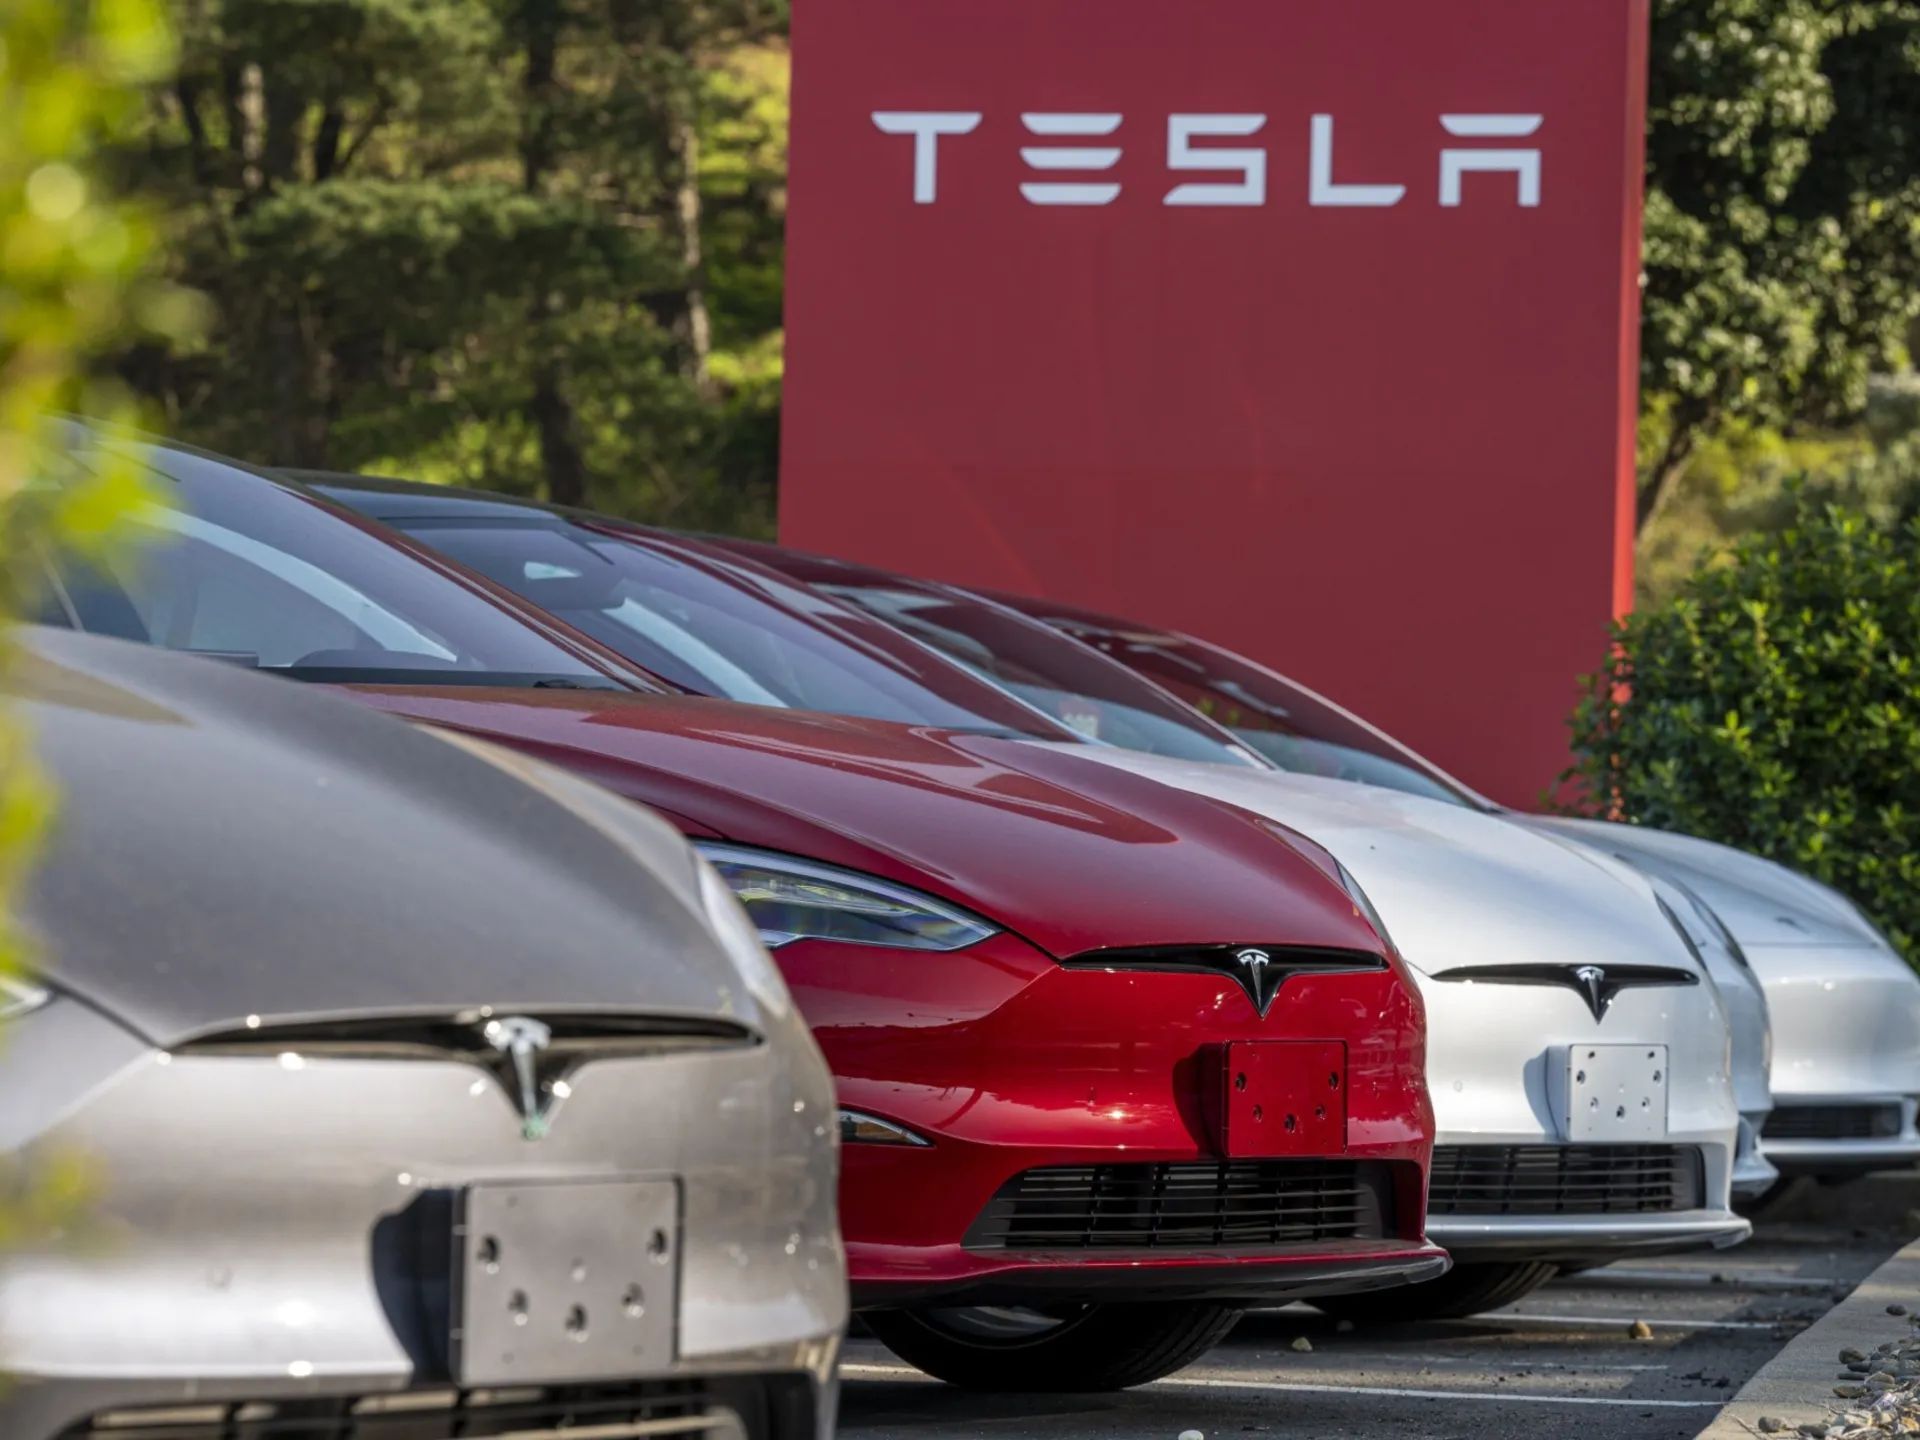 Tesla has reduced the pricing of all of its vehicles